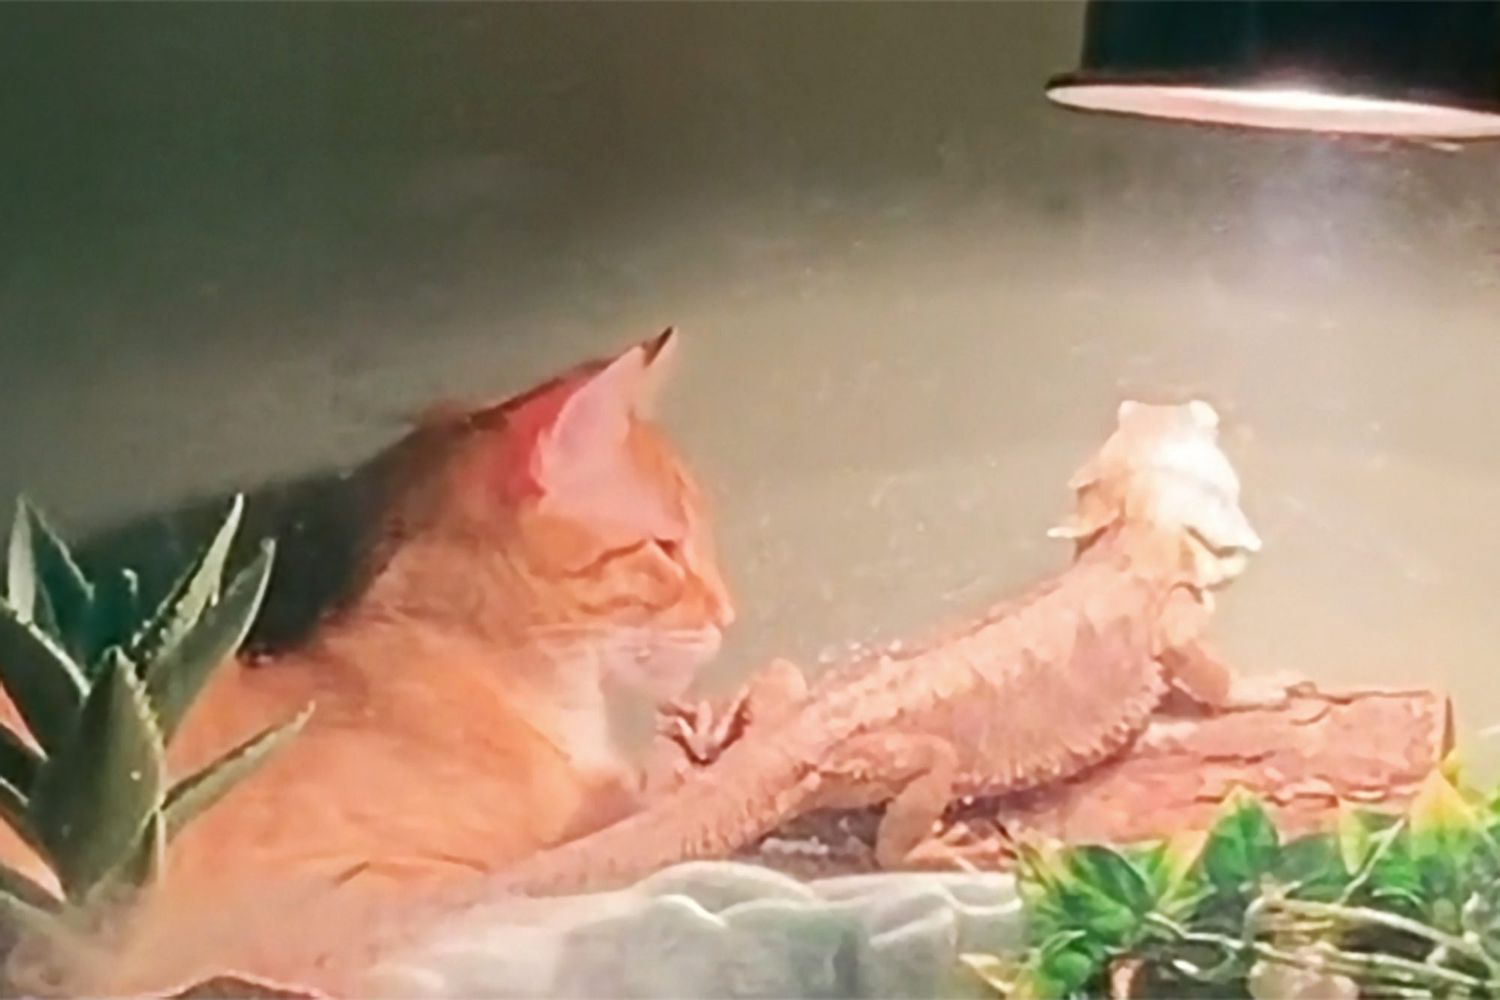 orange tabby cat and bearded dragon snuggling in a terrarium